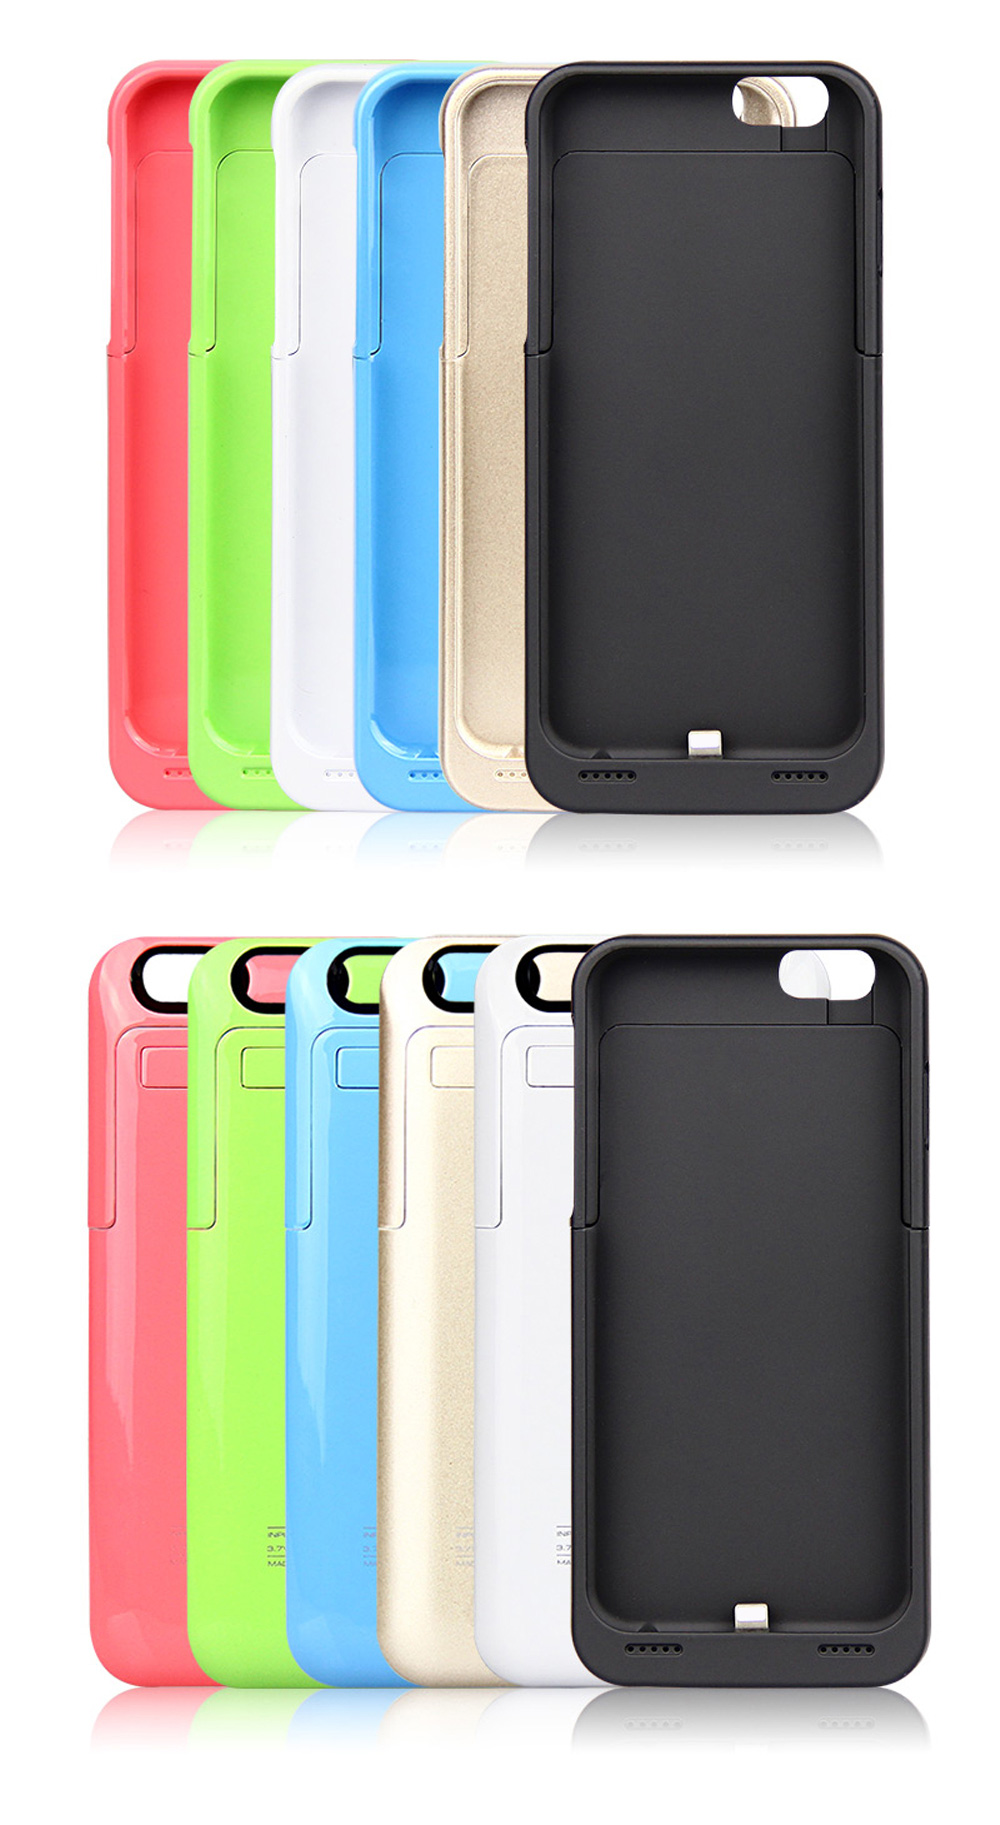 3500mAh External Battery Power Bank Charger Cover for iPhone 6 / 6S 4.7 inch